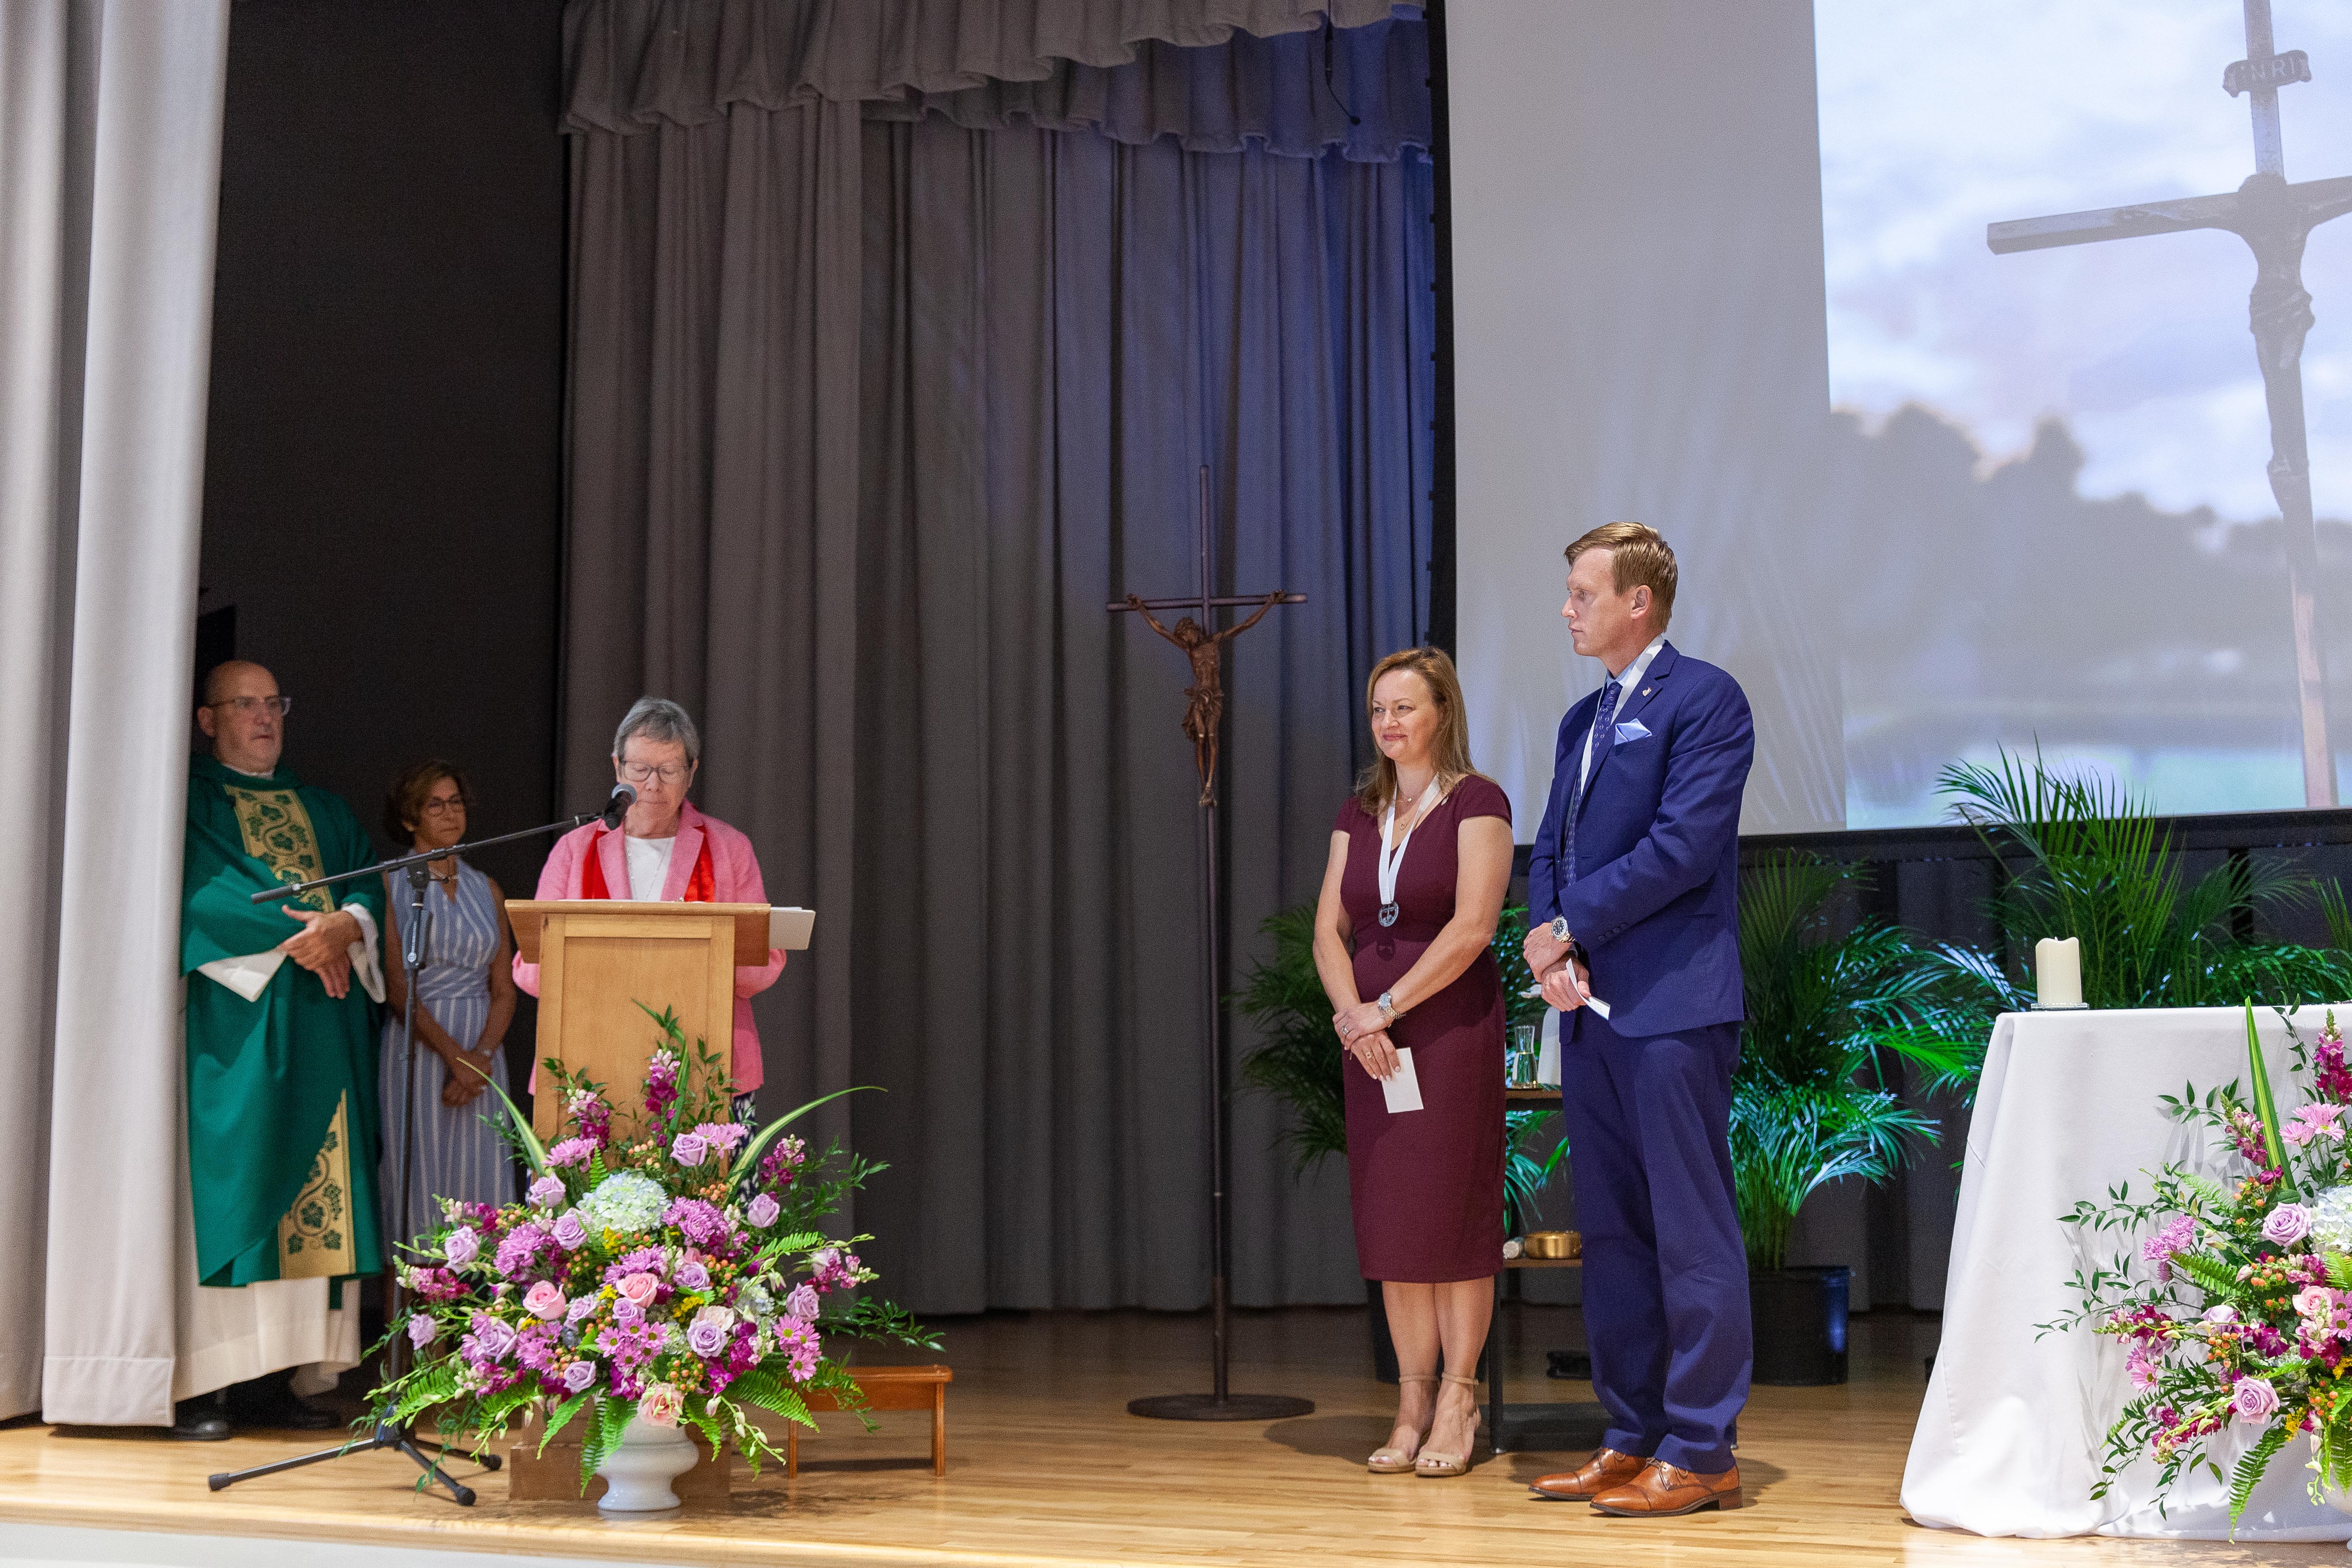 Provincial Suzanne Cooke, RSCJ, leads a blessing over Heather Gillingham-Rivas and Patrick J. Coyle. (Photo courtesy of Carrollton School of the Sacred Heart)